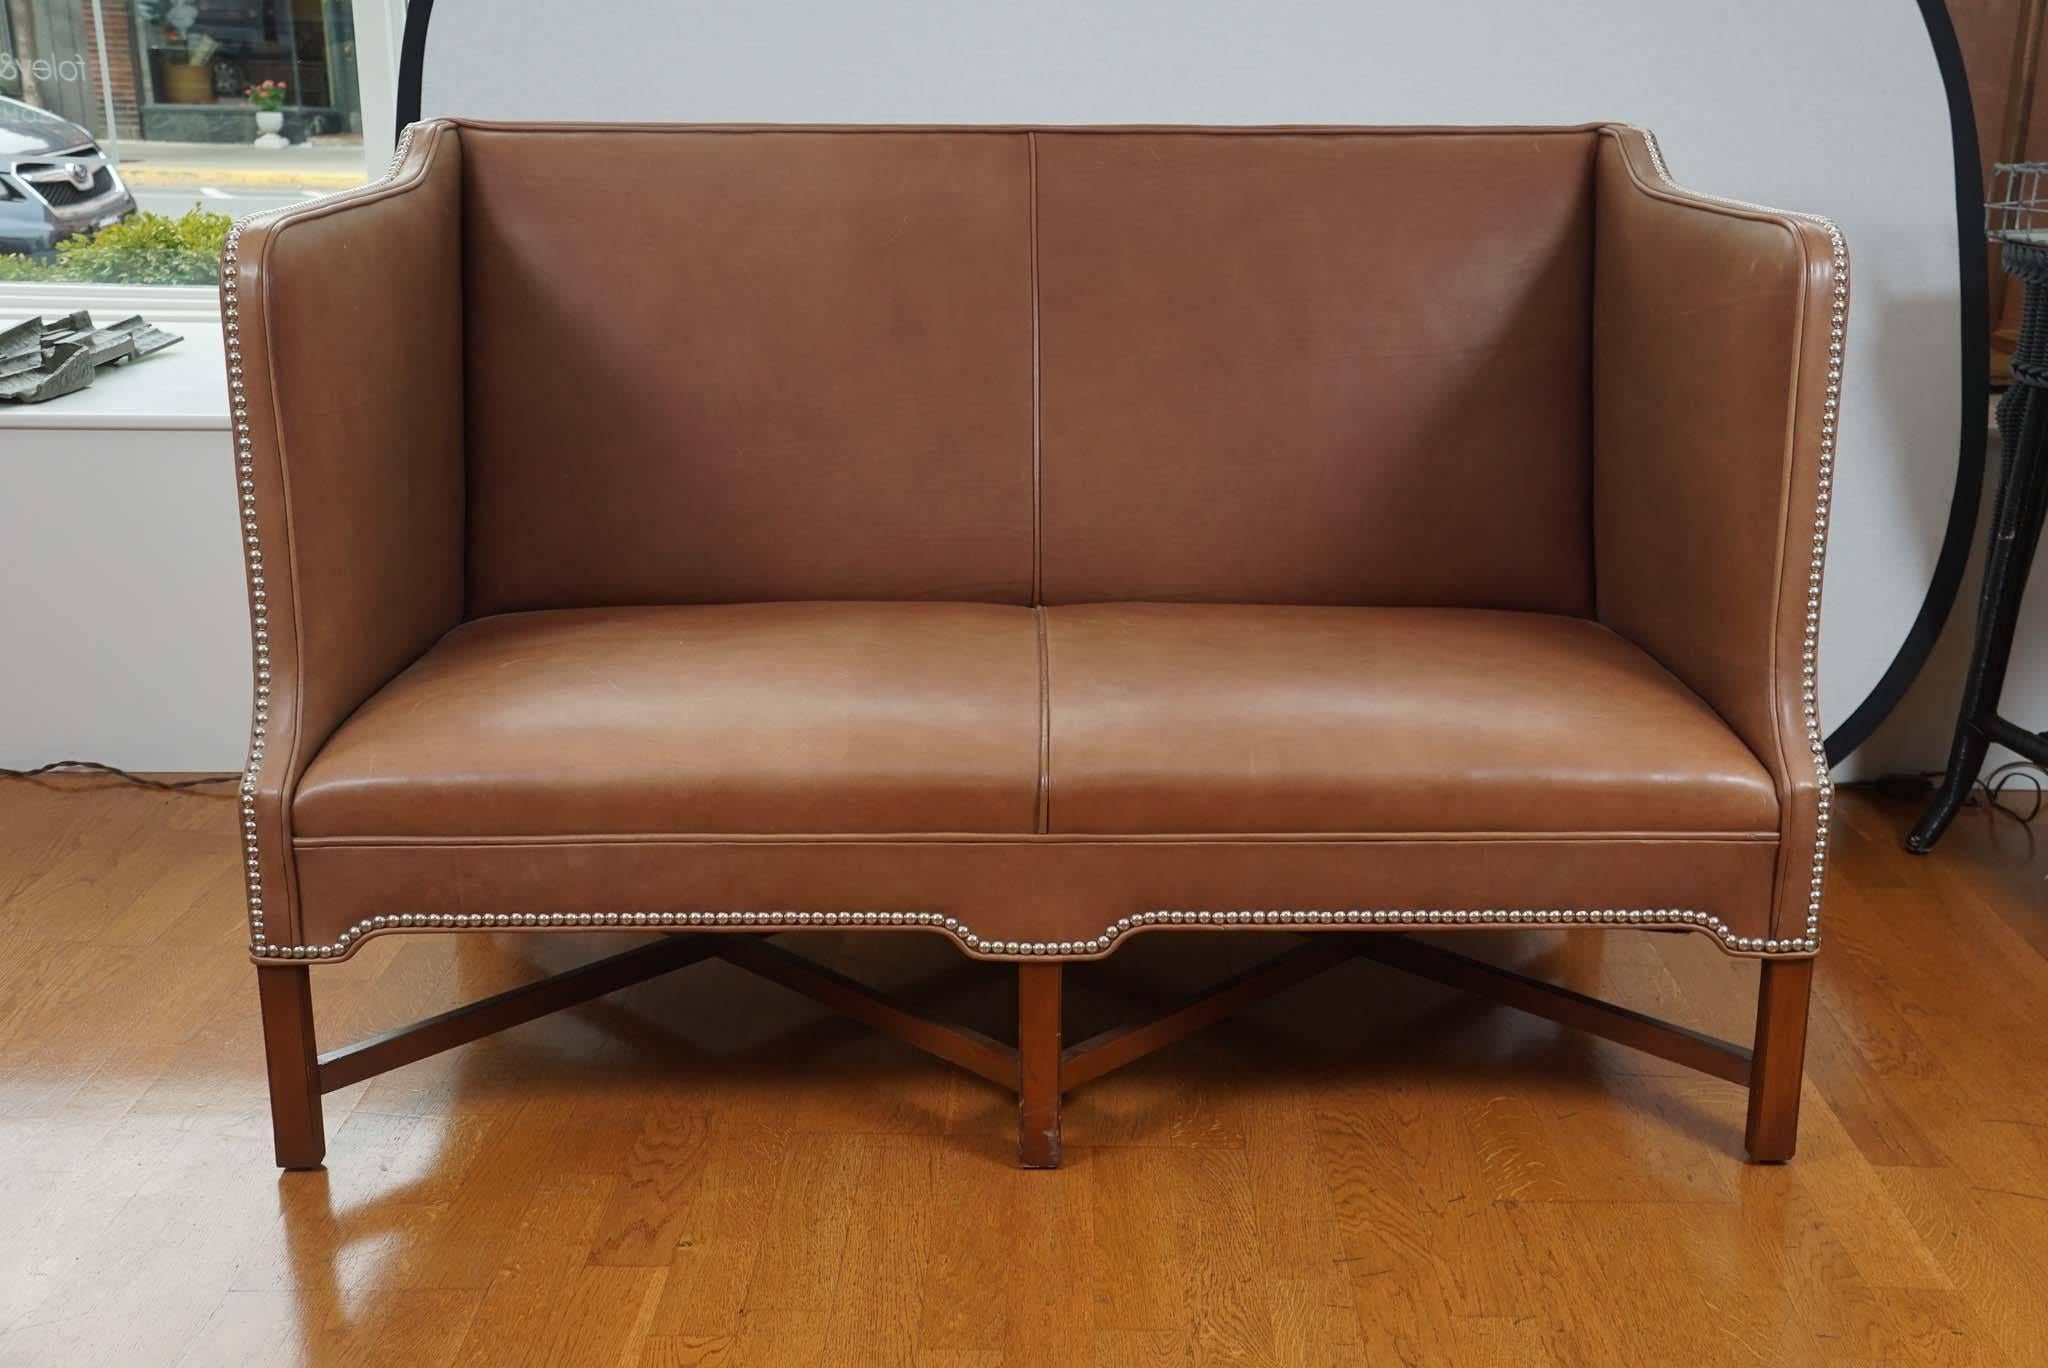 Handsome, Danish leather sofa, on a stained, beechwood frame,
with silver tack detailing. Designed by Kaare Klint for rud.